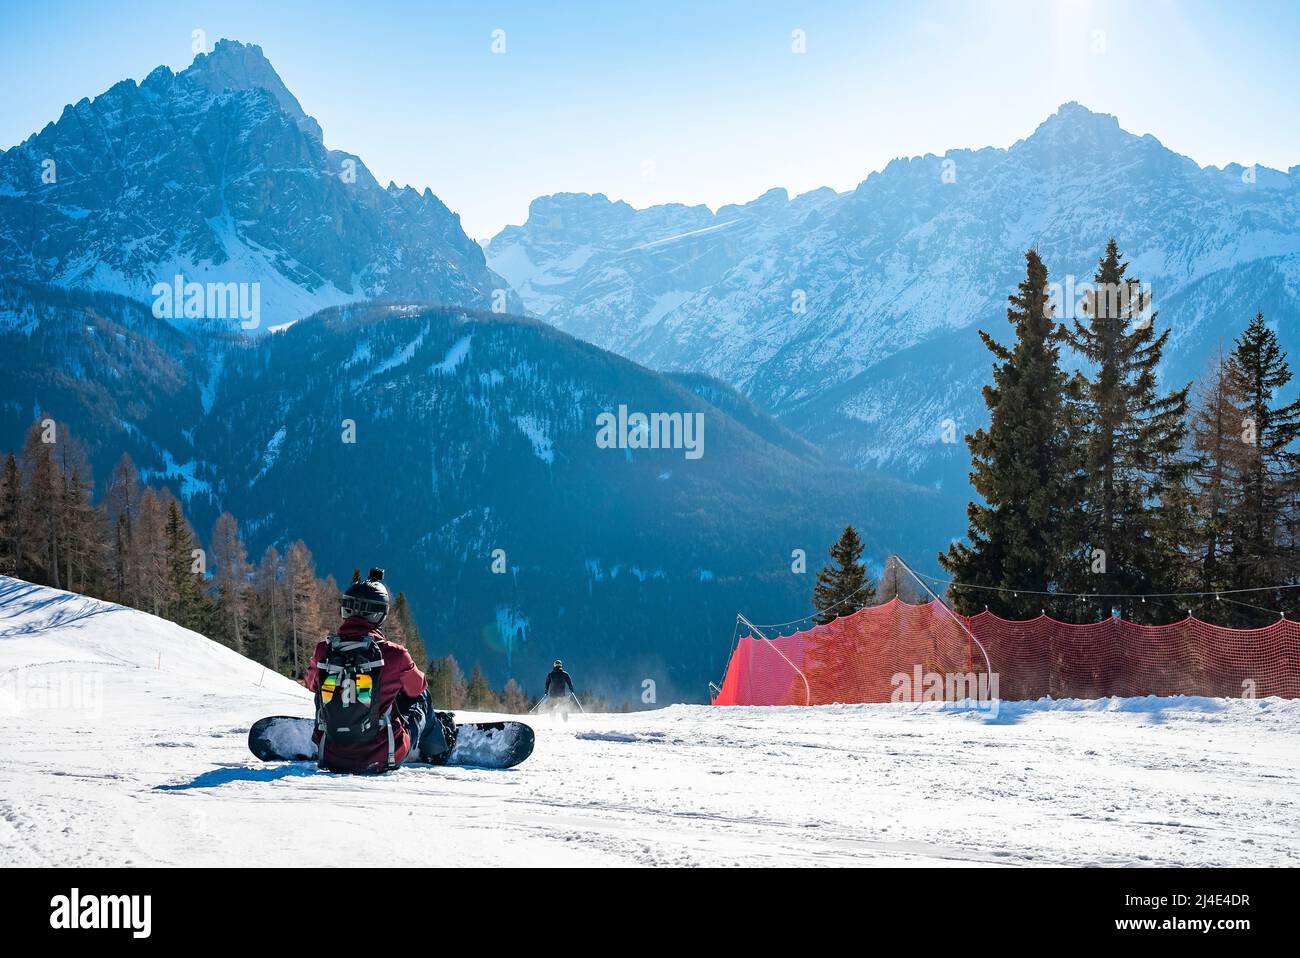 Rear view of tired snowboarder sitting on snowy landscape against mountains Stock Photo